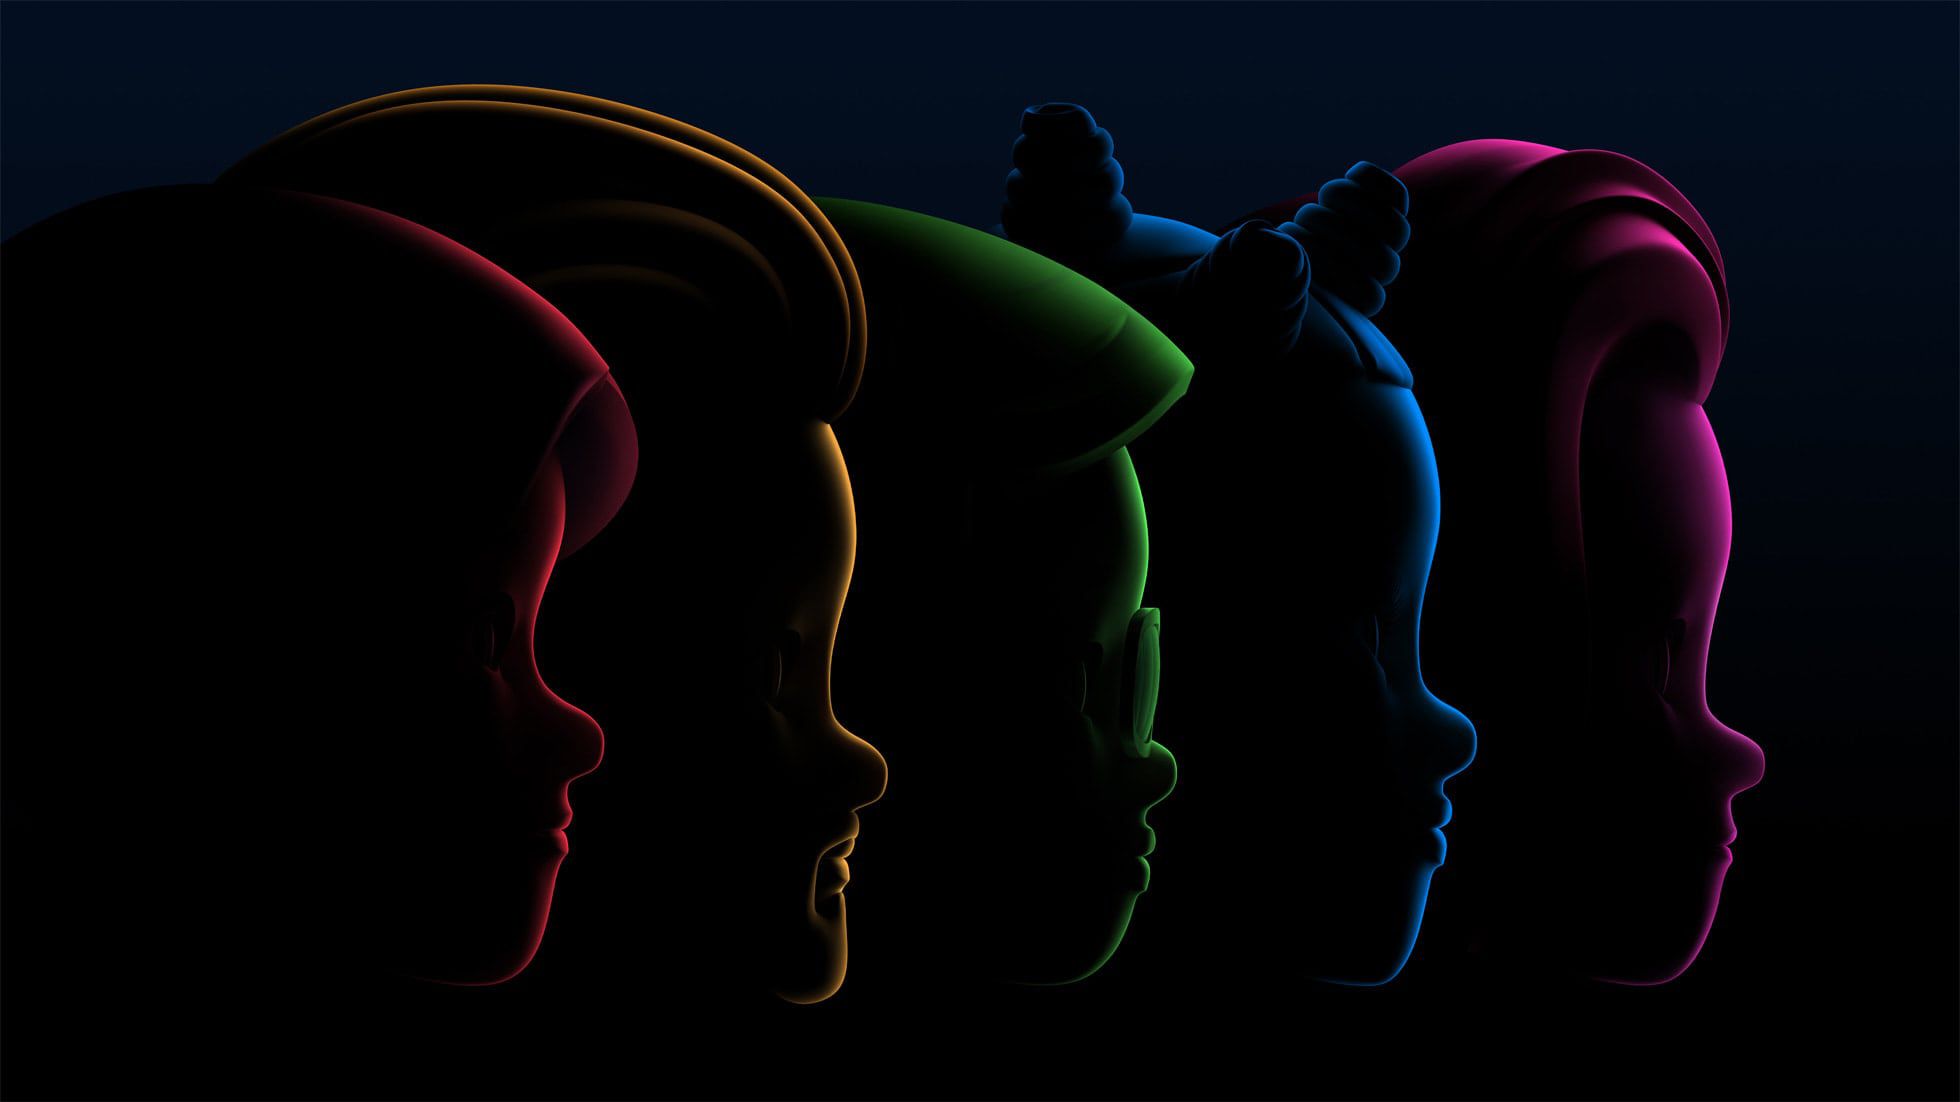 Header image from Apple WWDC 2022